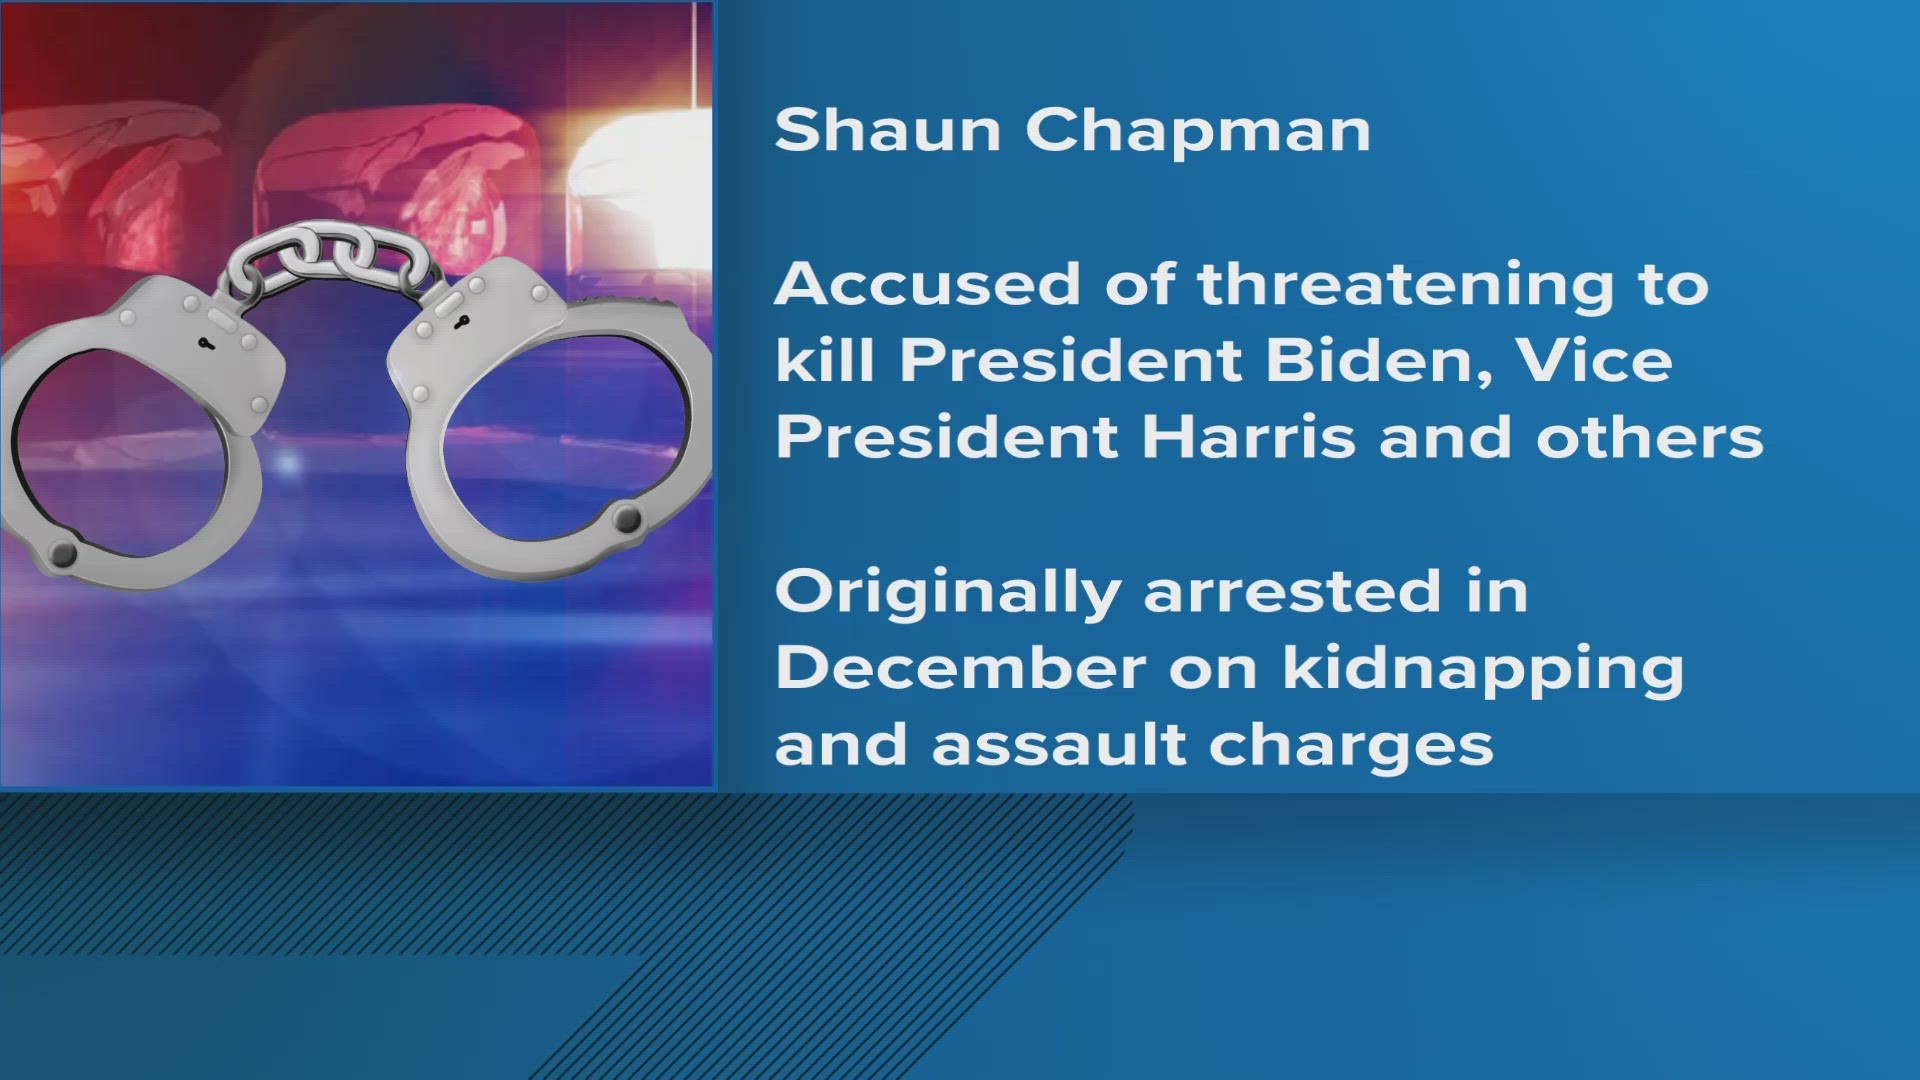 Orleans inmate rearrested for threats against Biden, Harris, Trump, and other U.S. leaders.